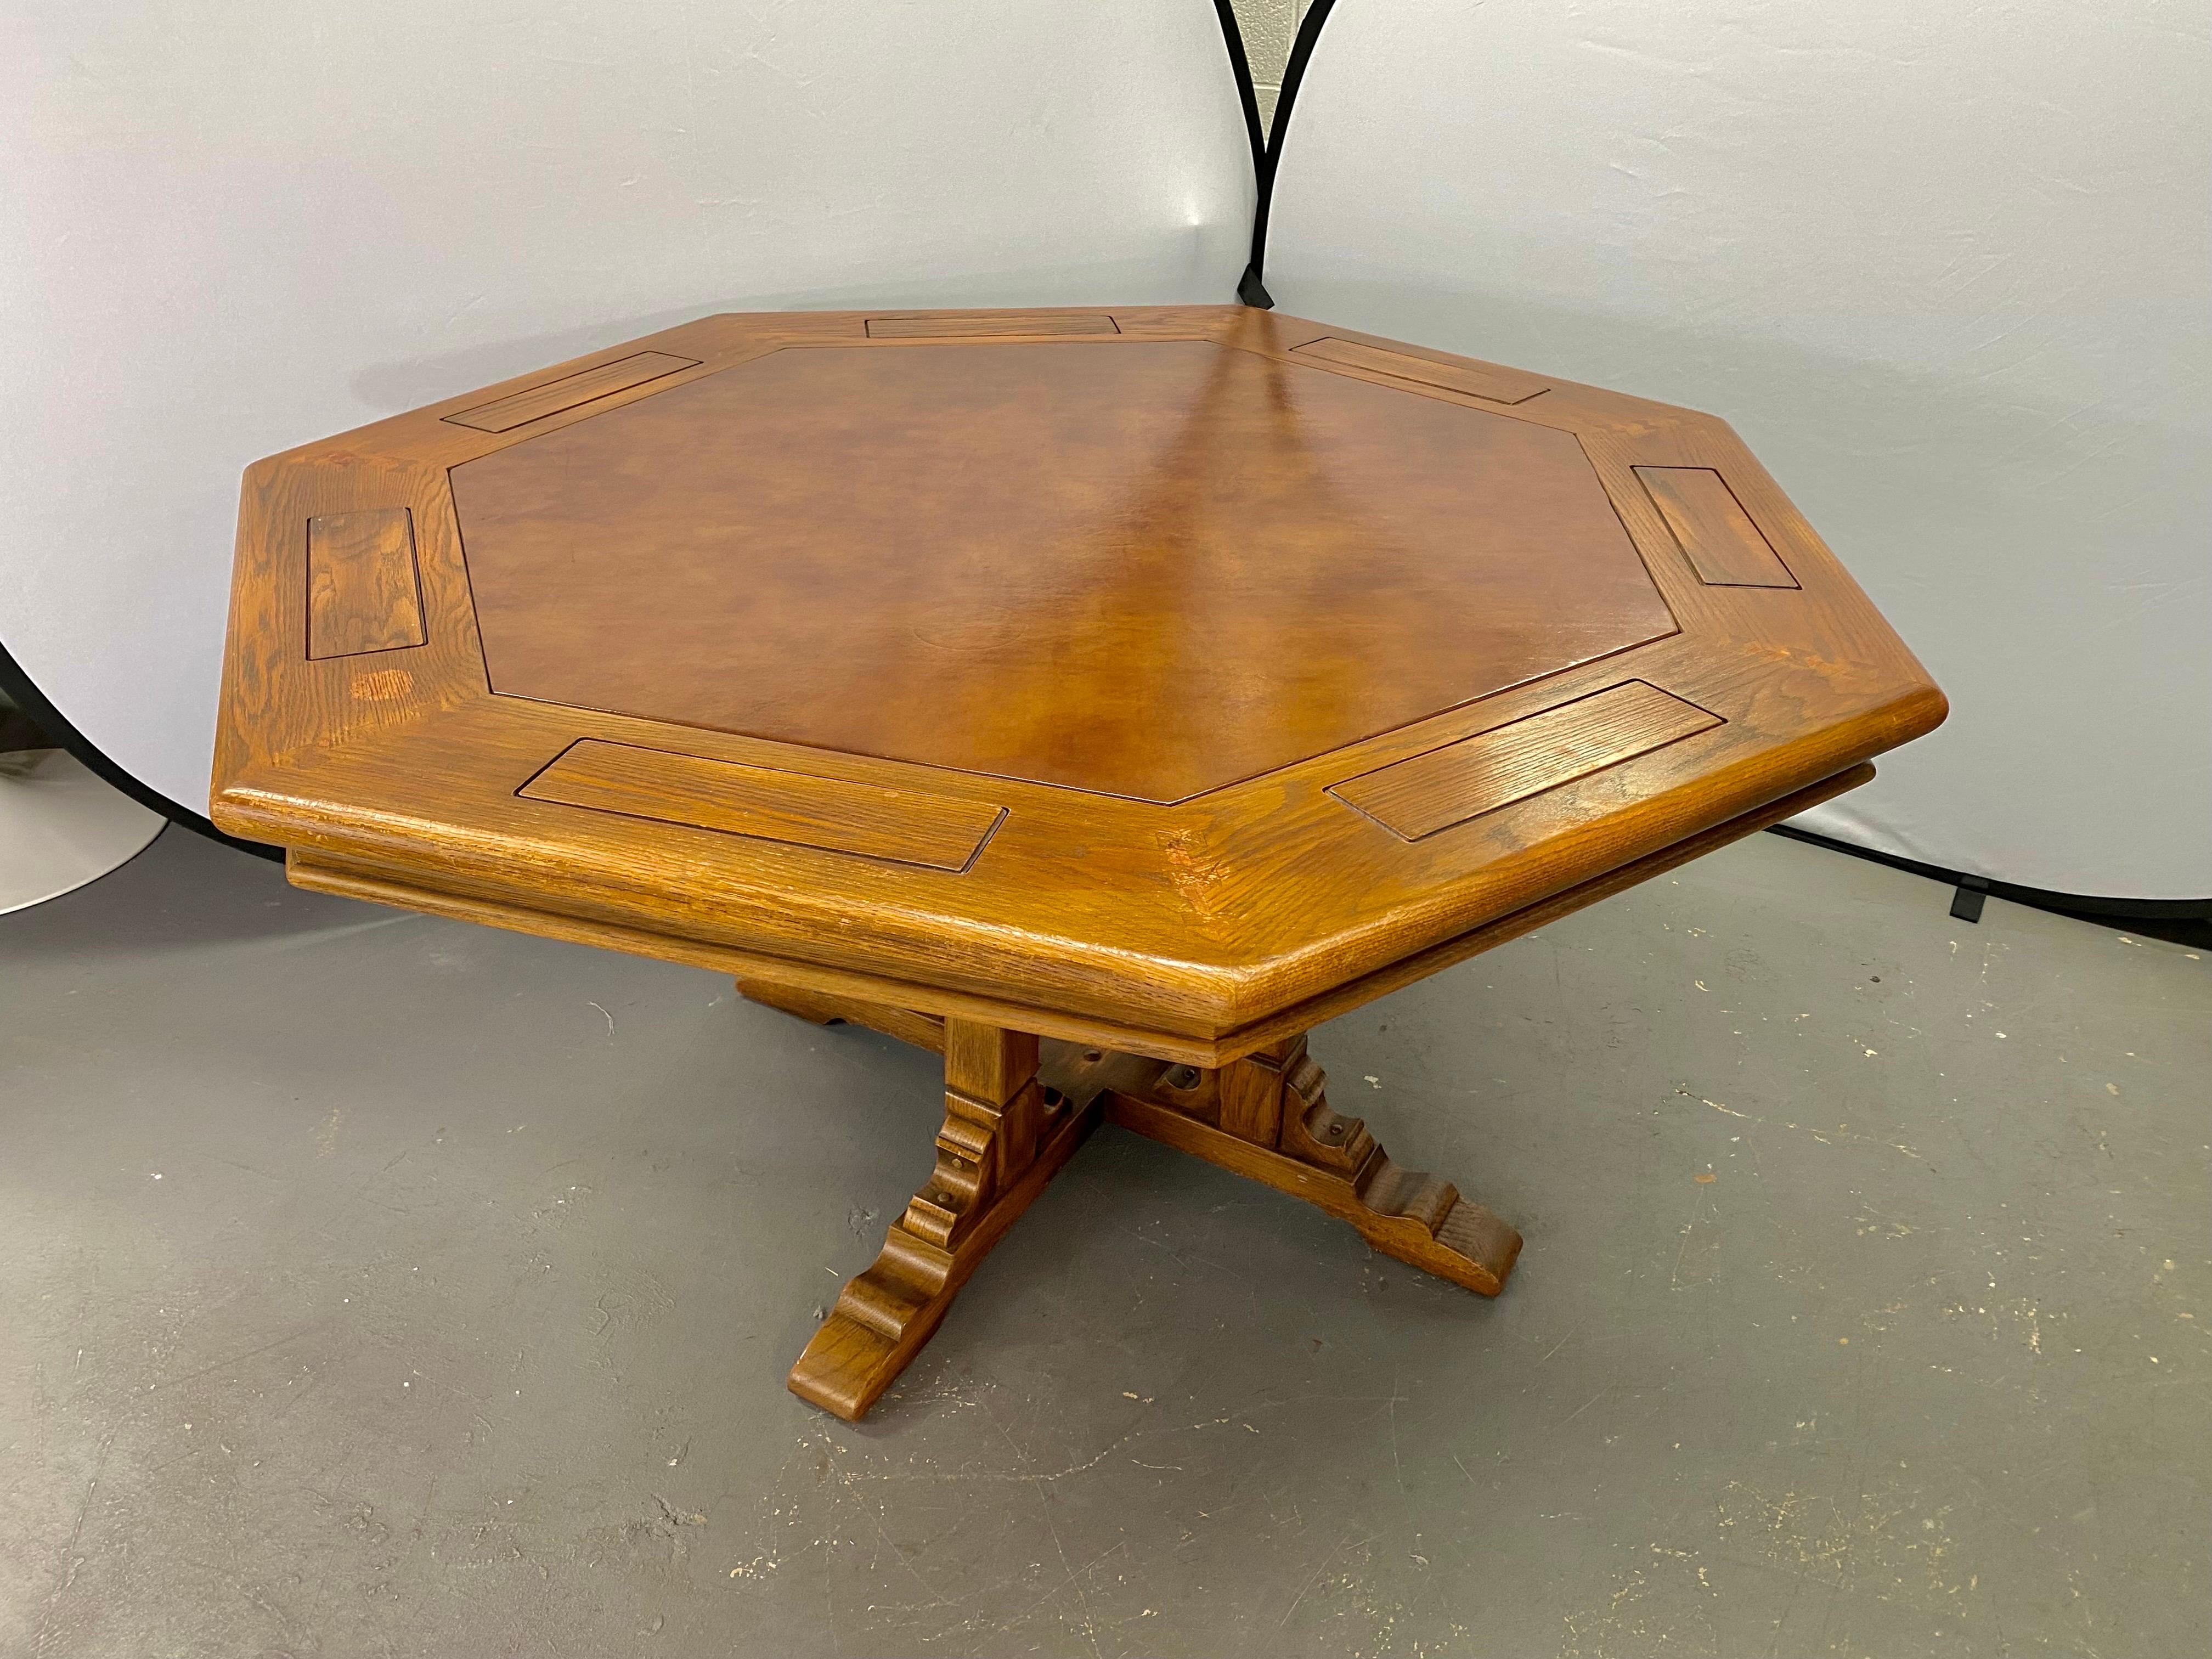 An impressive and rare Romweber viking oak poker game table. The table features 7 sides and a faux leather / vinyl tooled top in light brown matching nicely the color of the wood. The table has 7 solid oak chip holders or caddies which can be